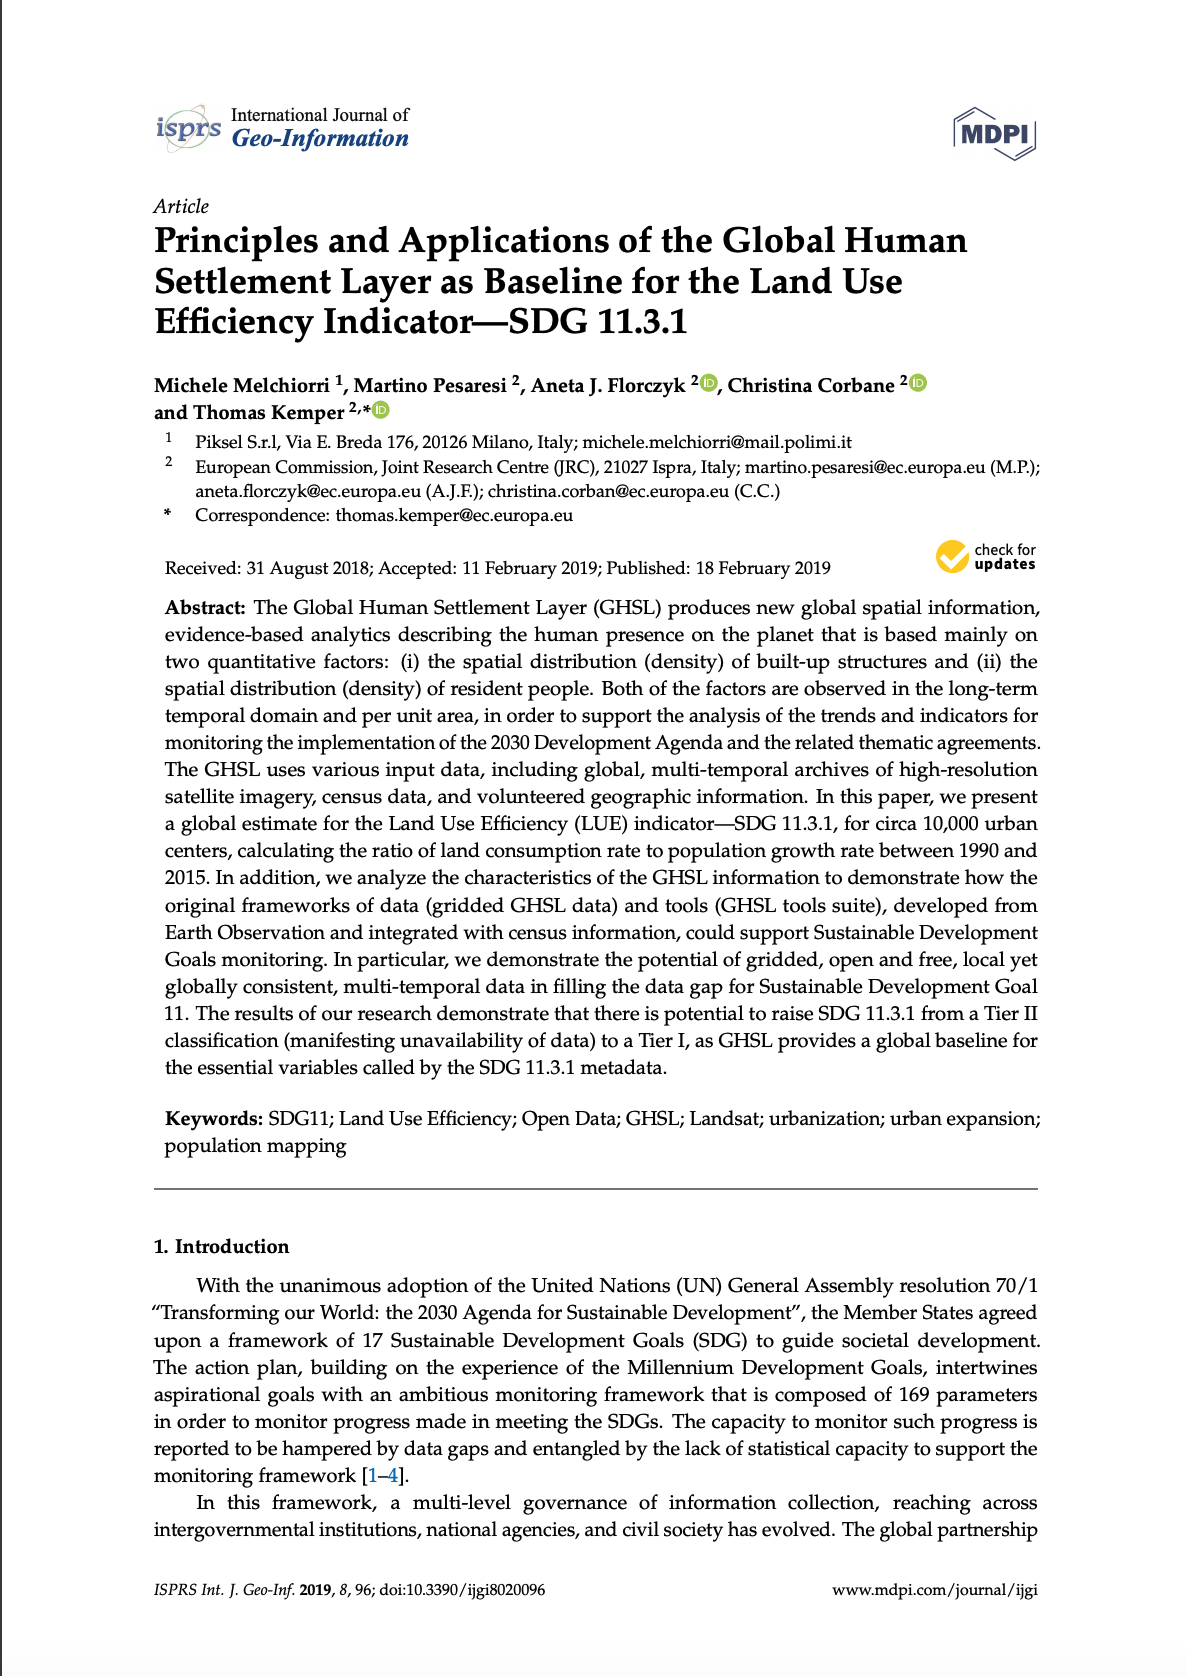 Principles and Applications of the Global Human Settlement Layer as Baseline for the Land Use Efficiency Indicator—SDG 11.3.1 cover image